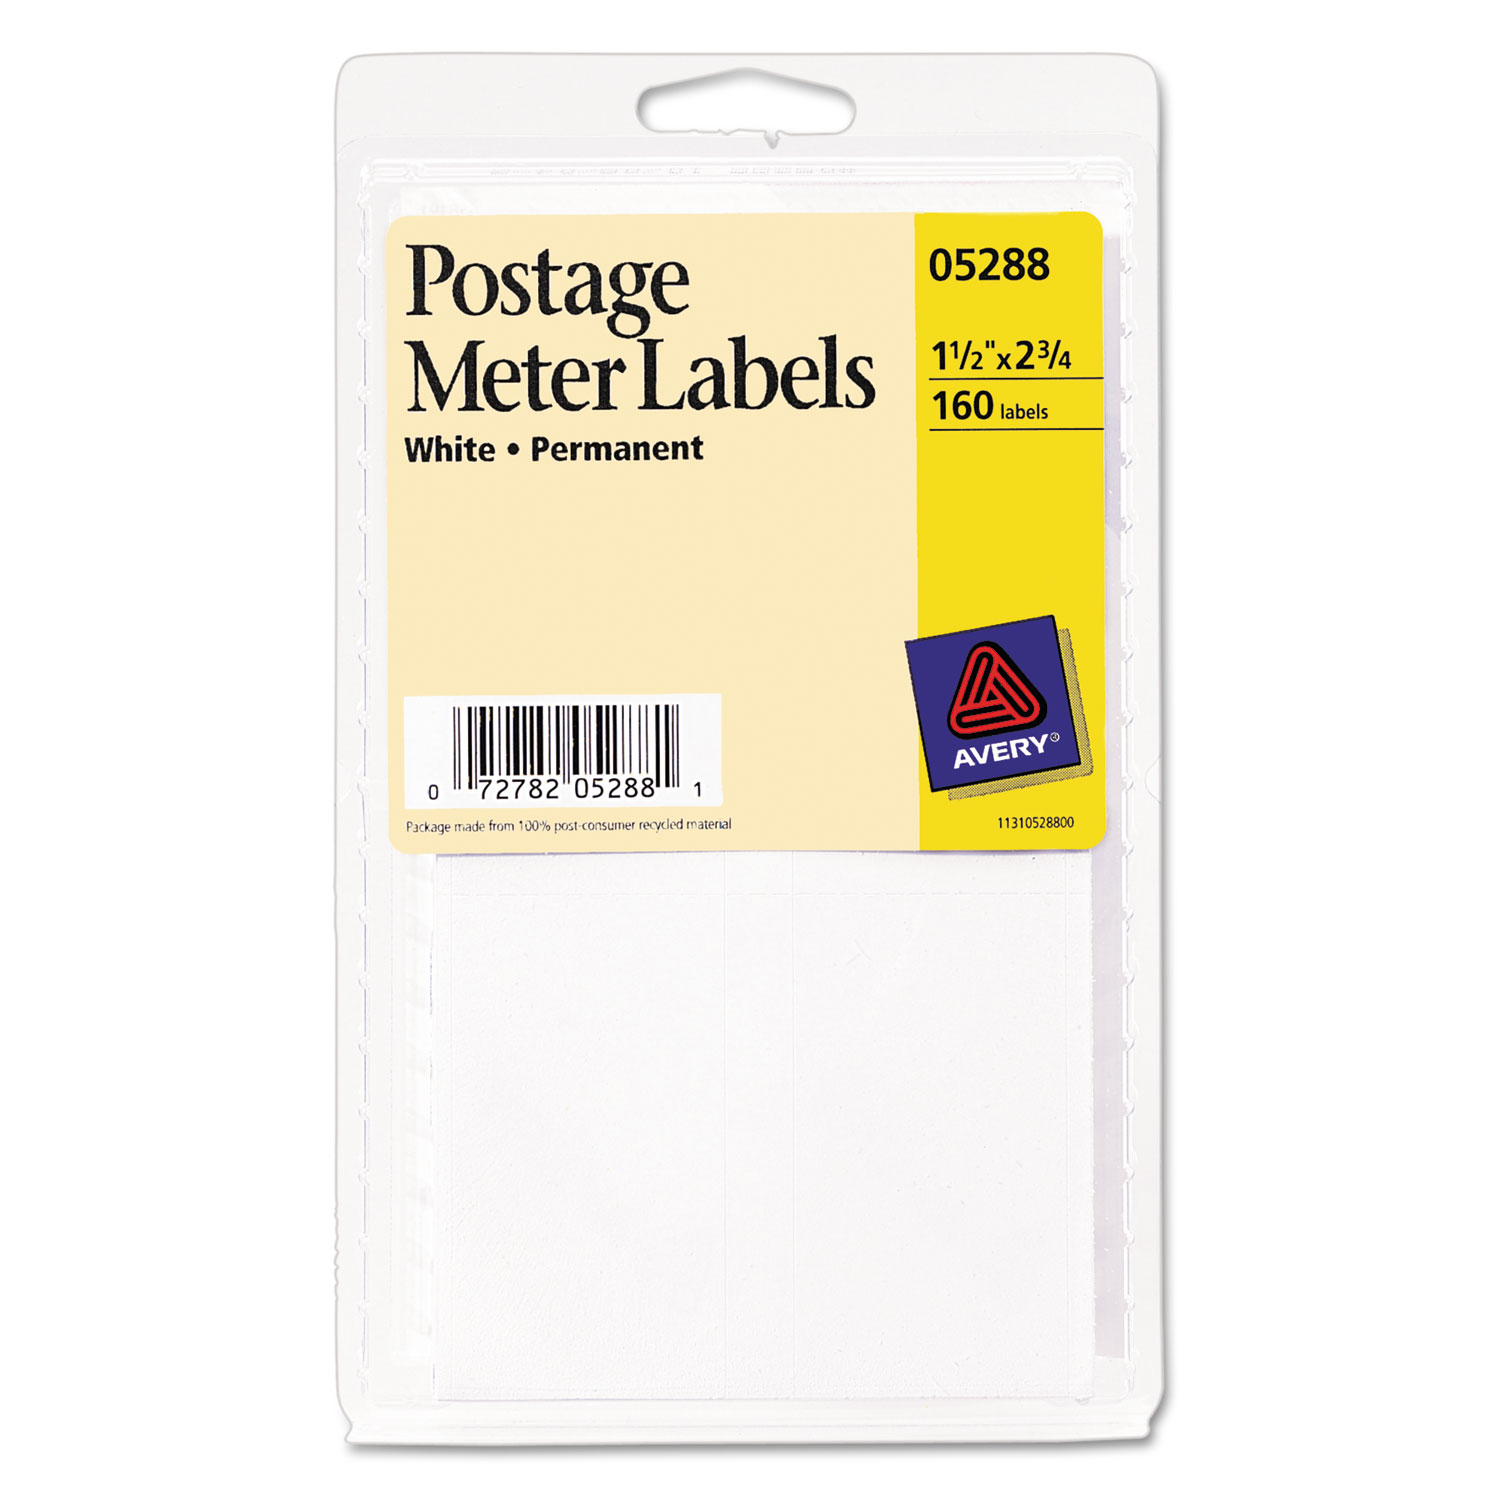 Permanent Adhesive Postage Meter Labels, 1 1/2 x 2 3/4, White, 160/Pack